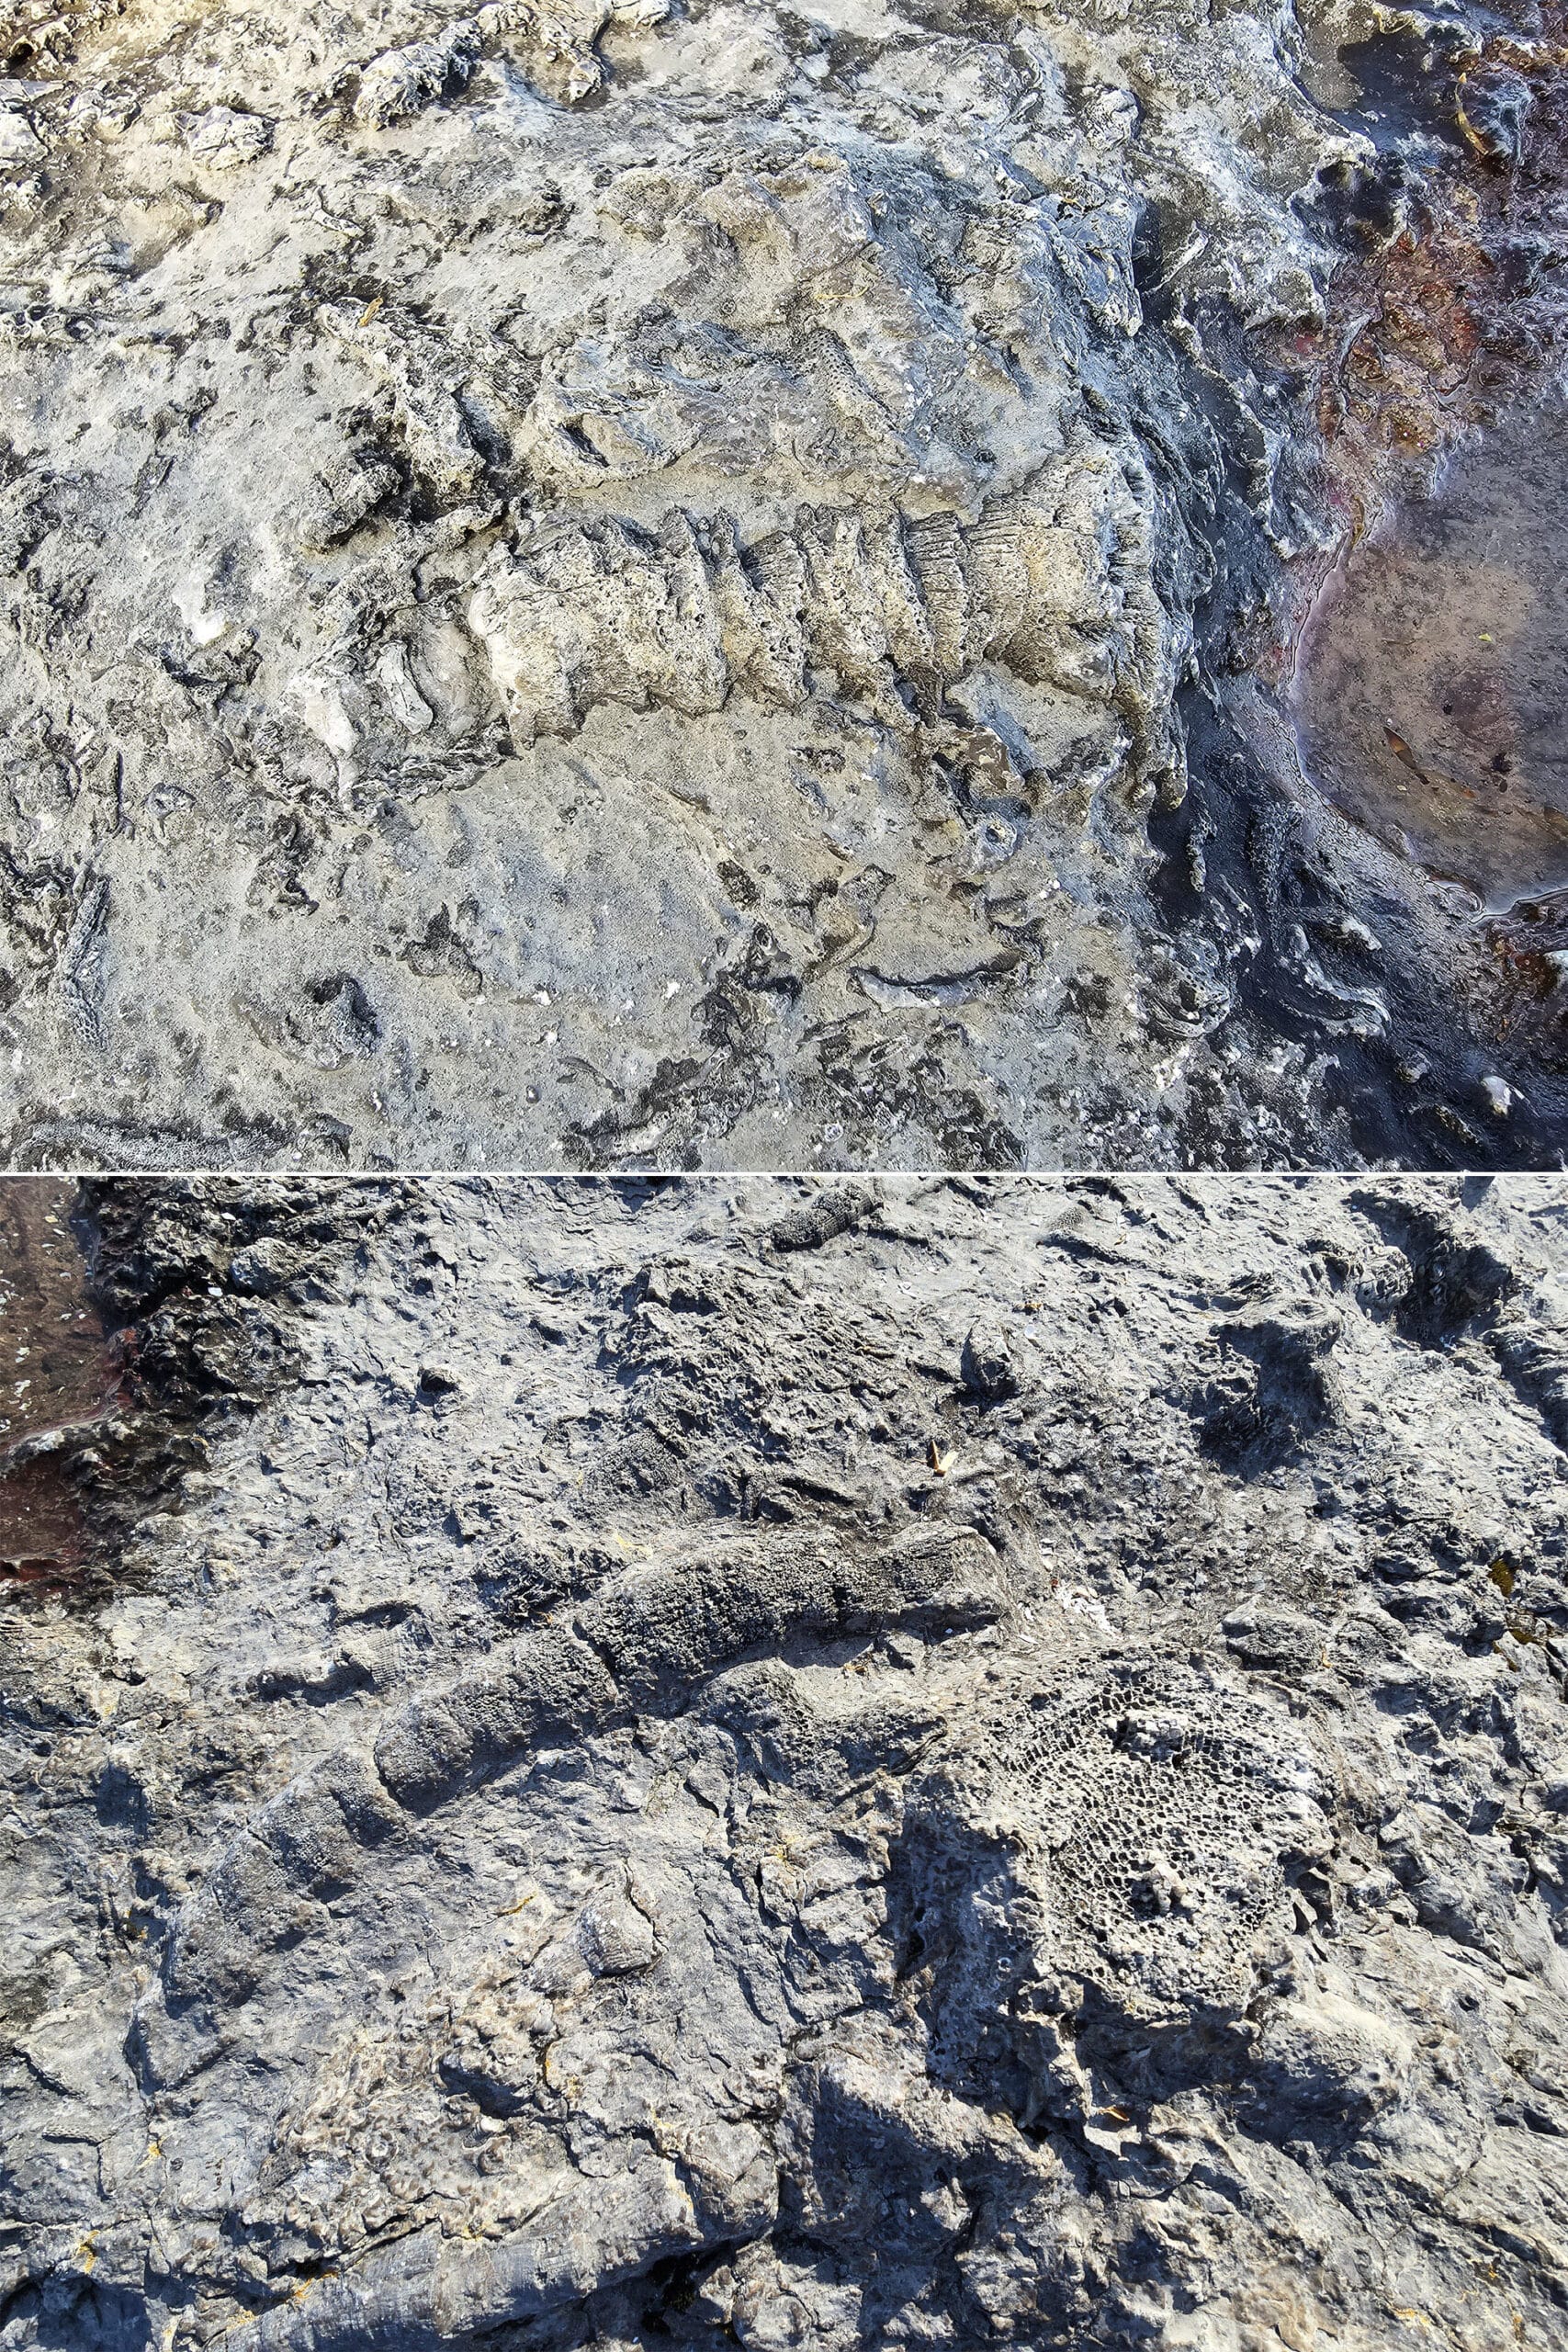 2 part image showing different limestone fossils.